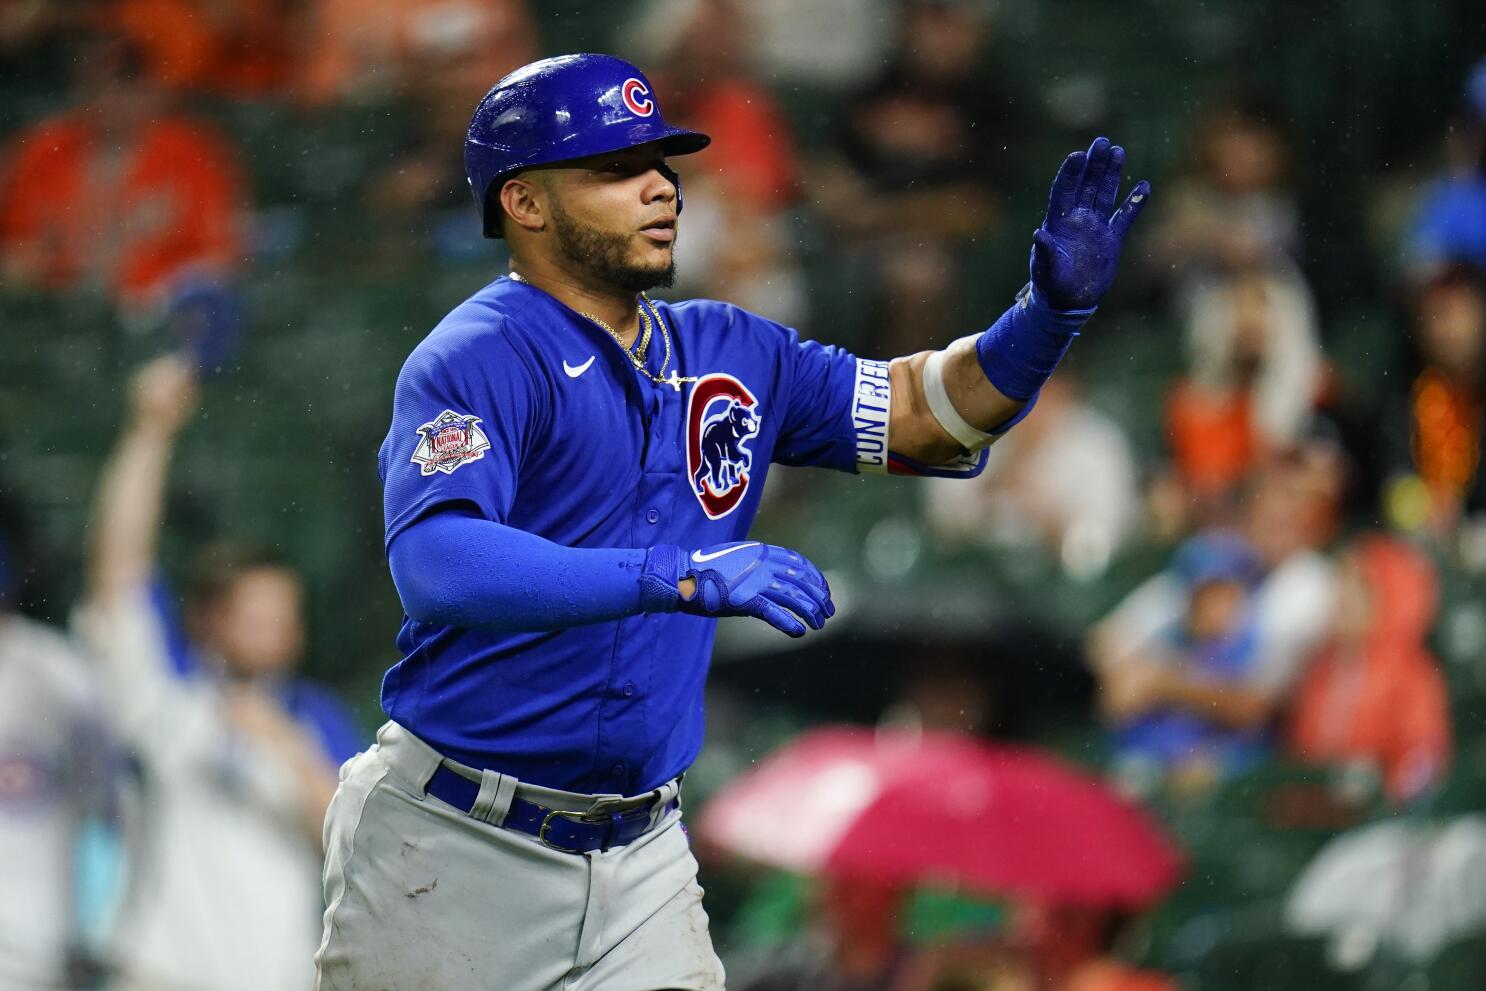 Could Chicago Cubs Catcher Willson Contreras Sign a Deal with St